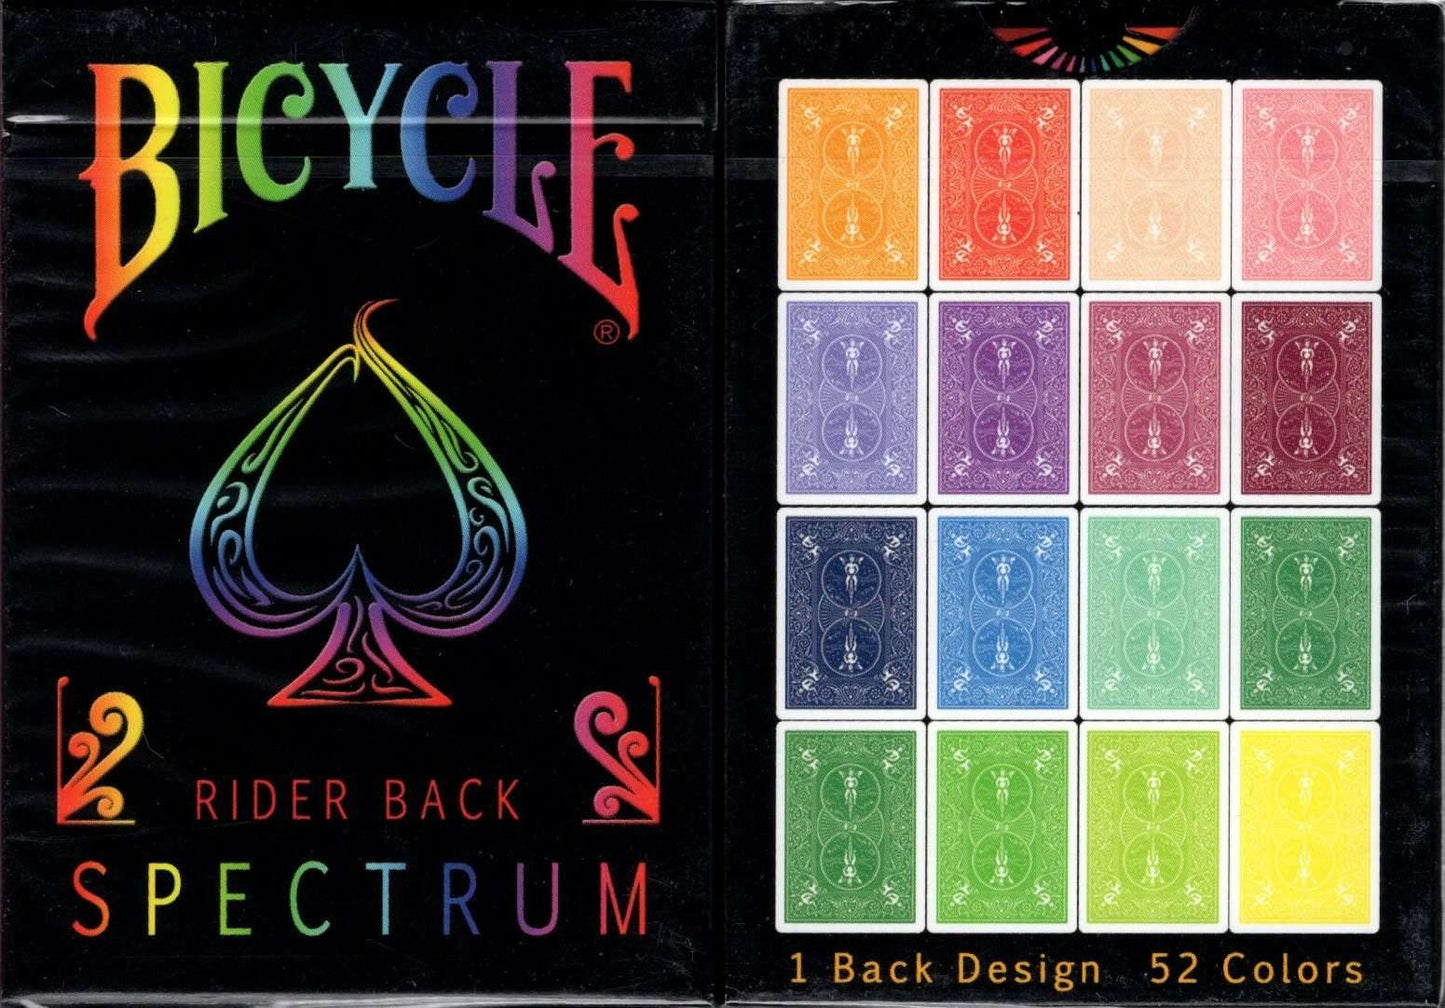 PlayingCardDecks.com-Rider Back Spectrum v2 Bicycle Playing Cards